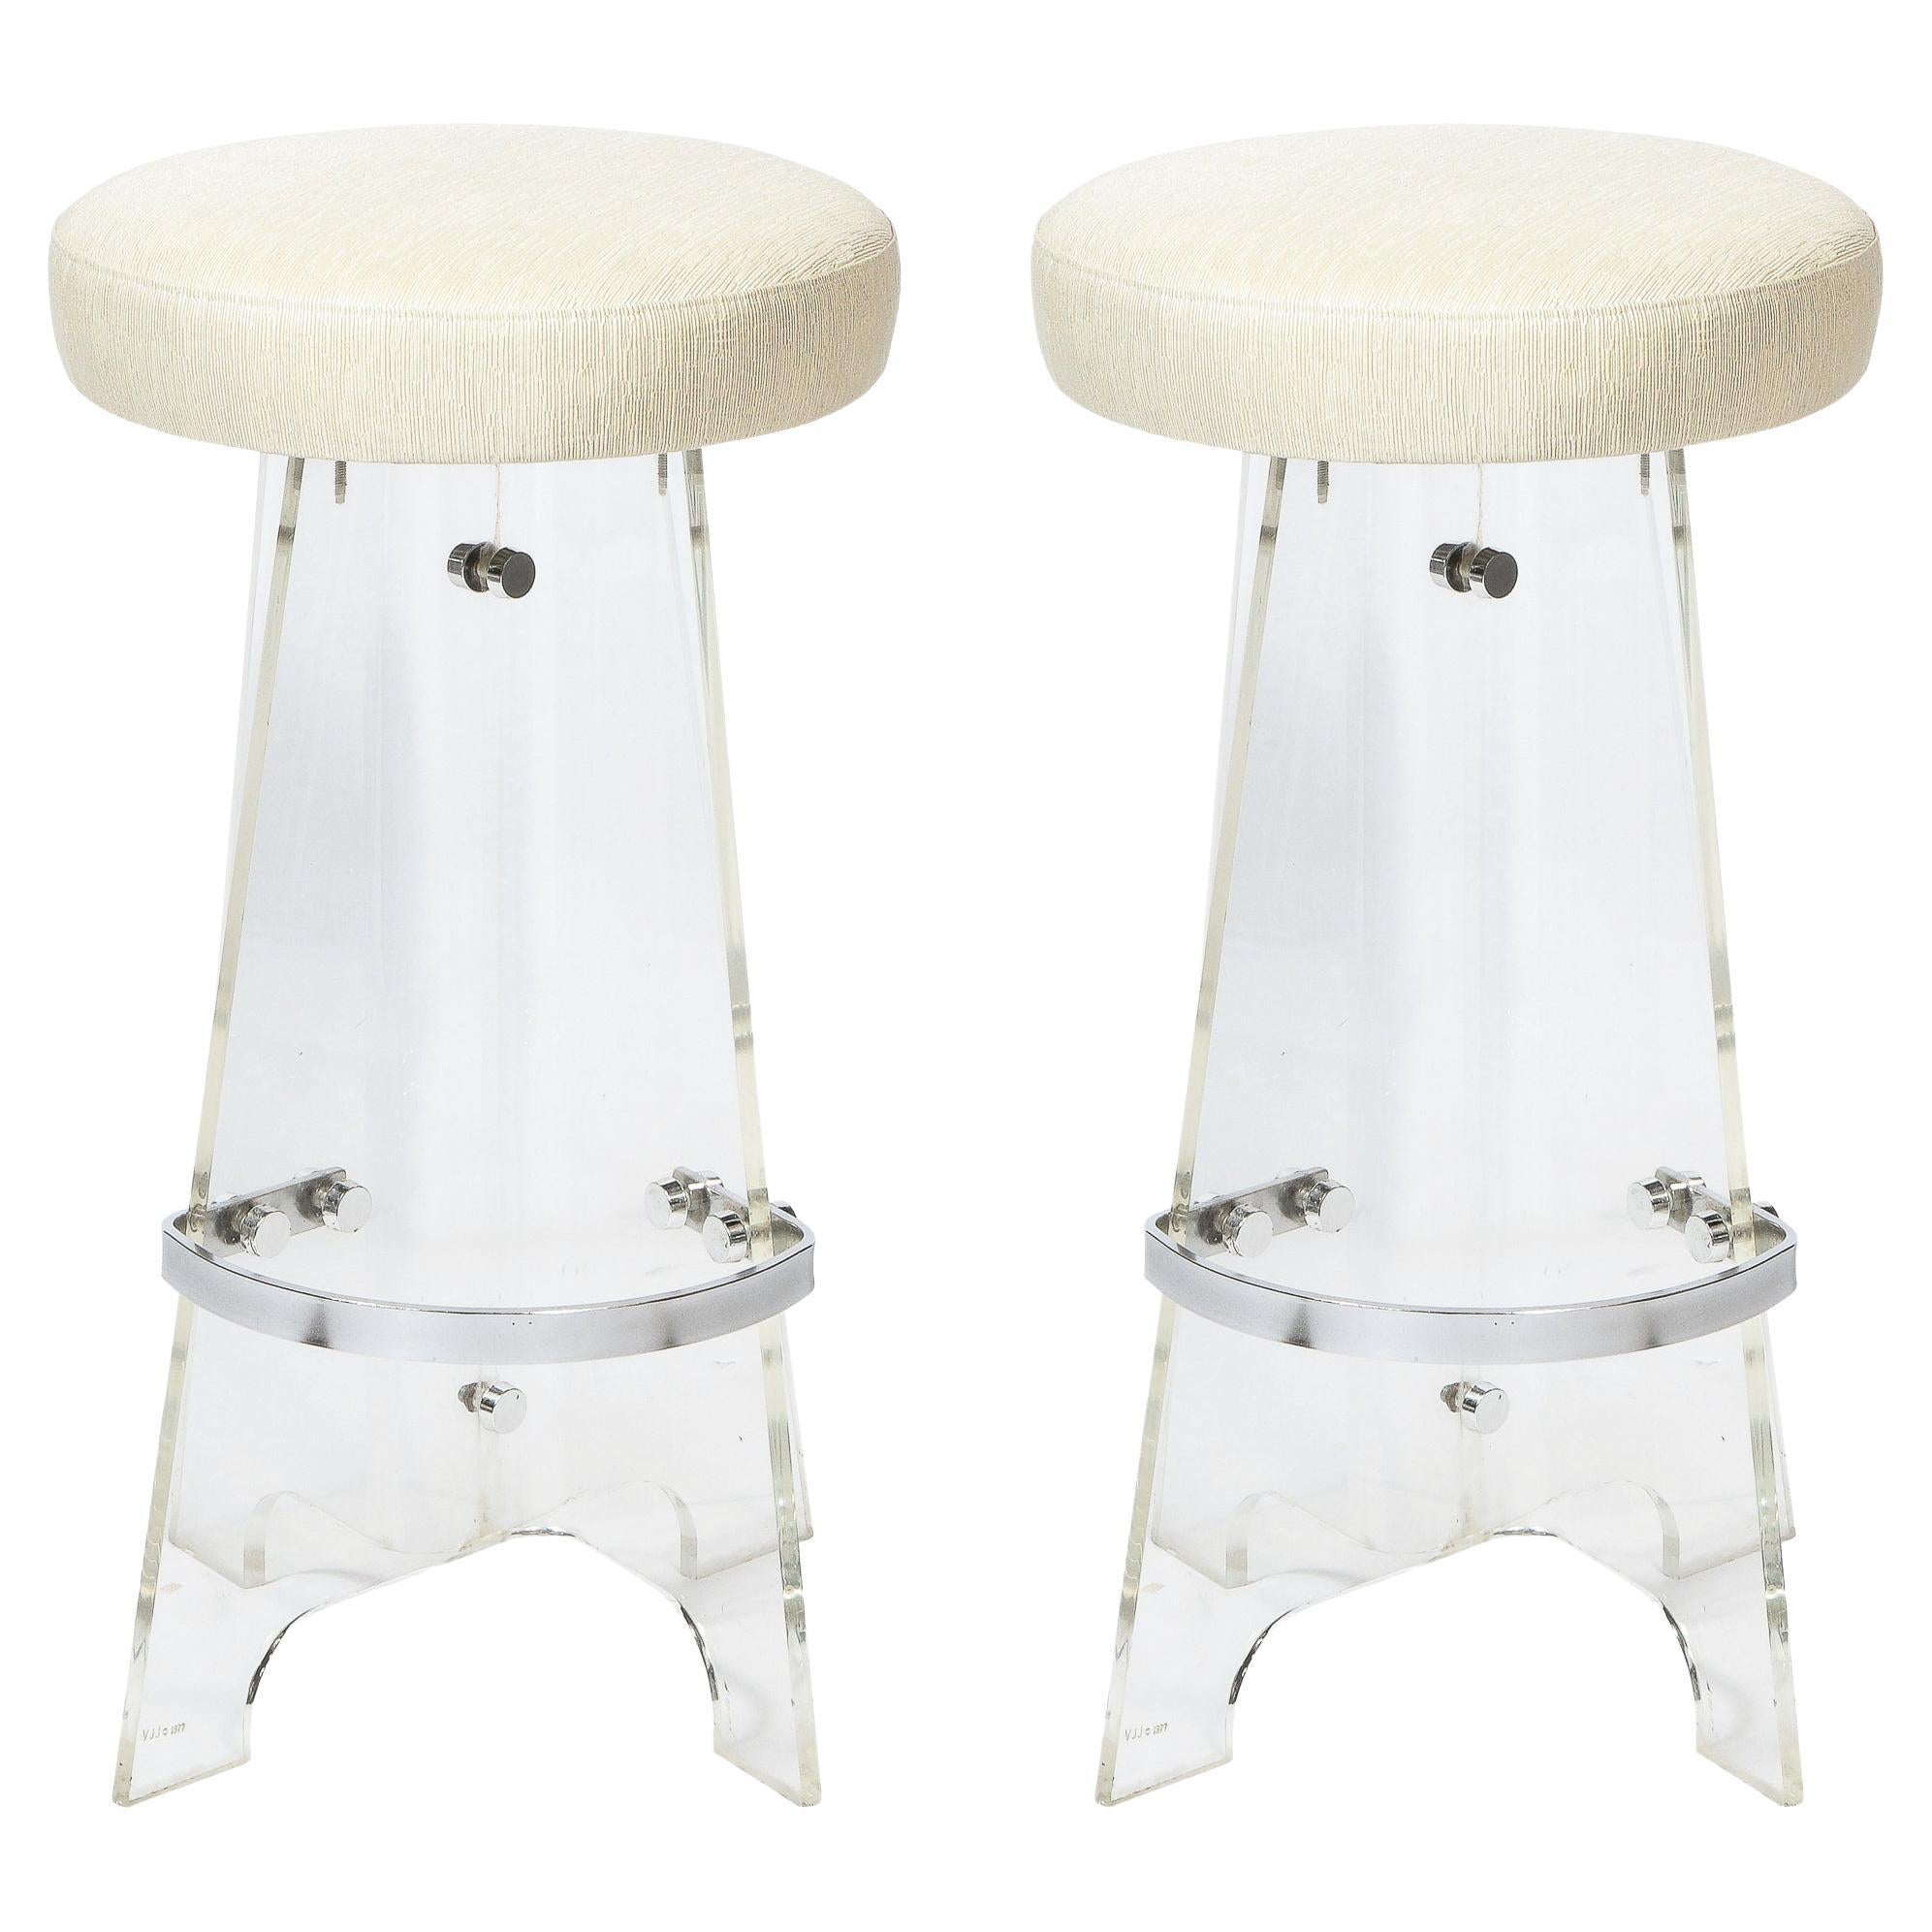 Pair of Mid-Century Modern Lucite, Chrome Bar Stools in Holly Hunt Upholstery